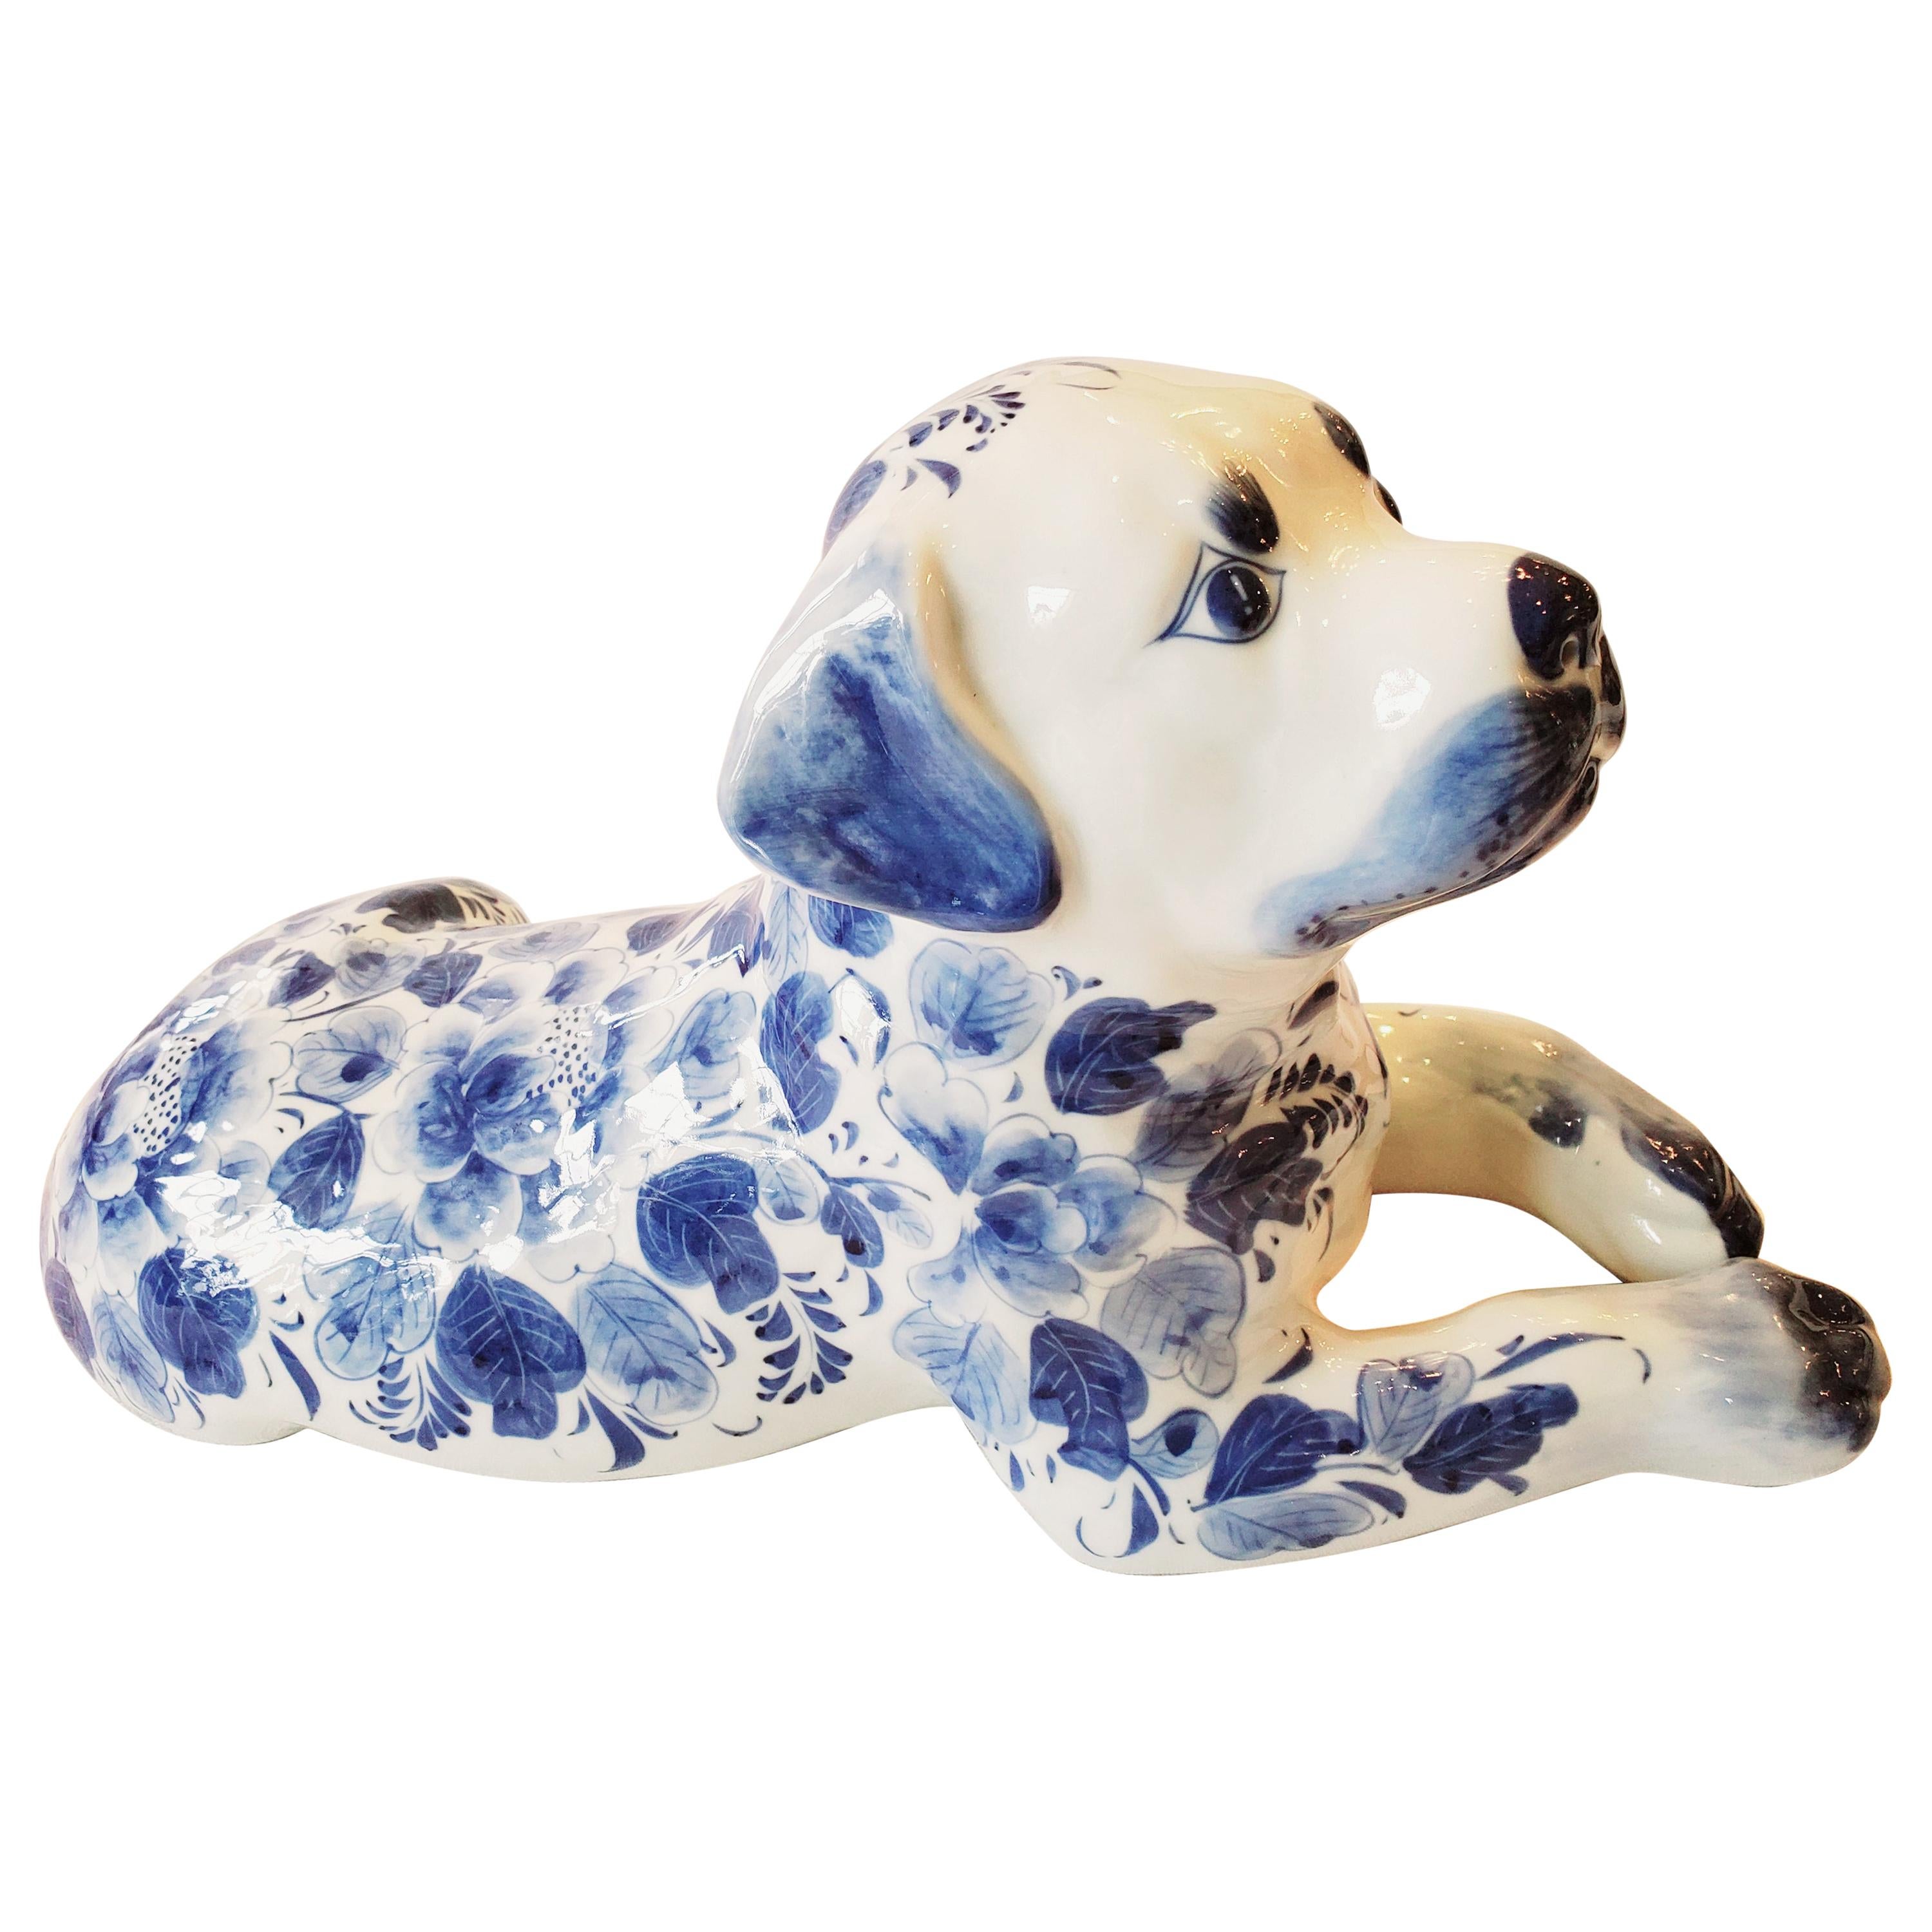 Adorable Reclining Blue and White Porcelain Dog Sculpture